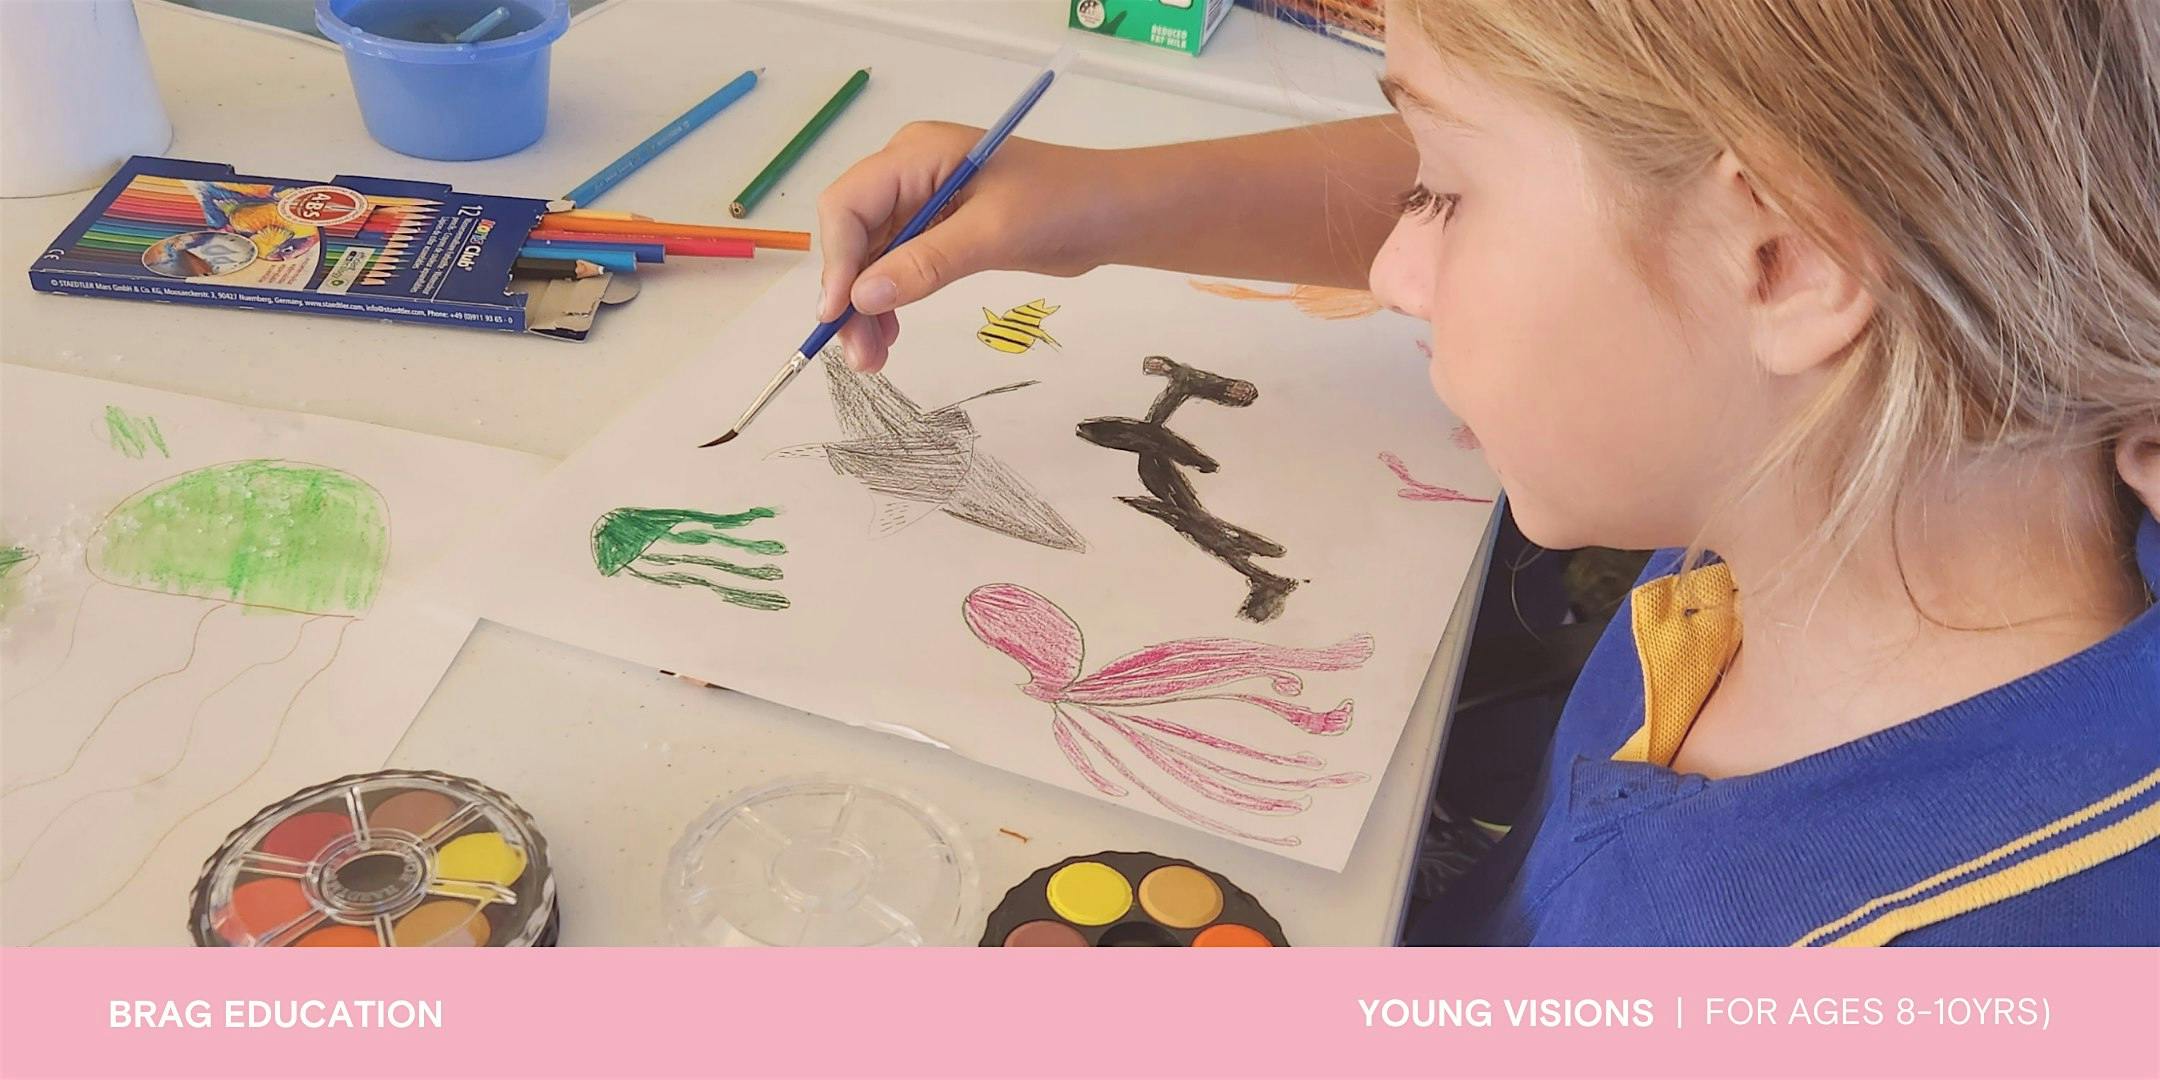 Image for After School Art Classes | Young Visions Term 3 (9-10yrs)